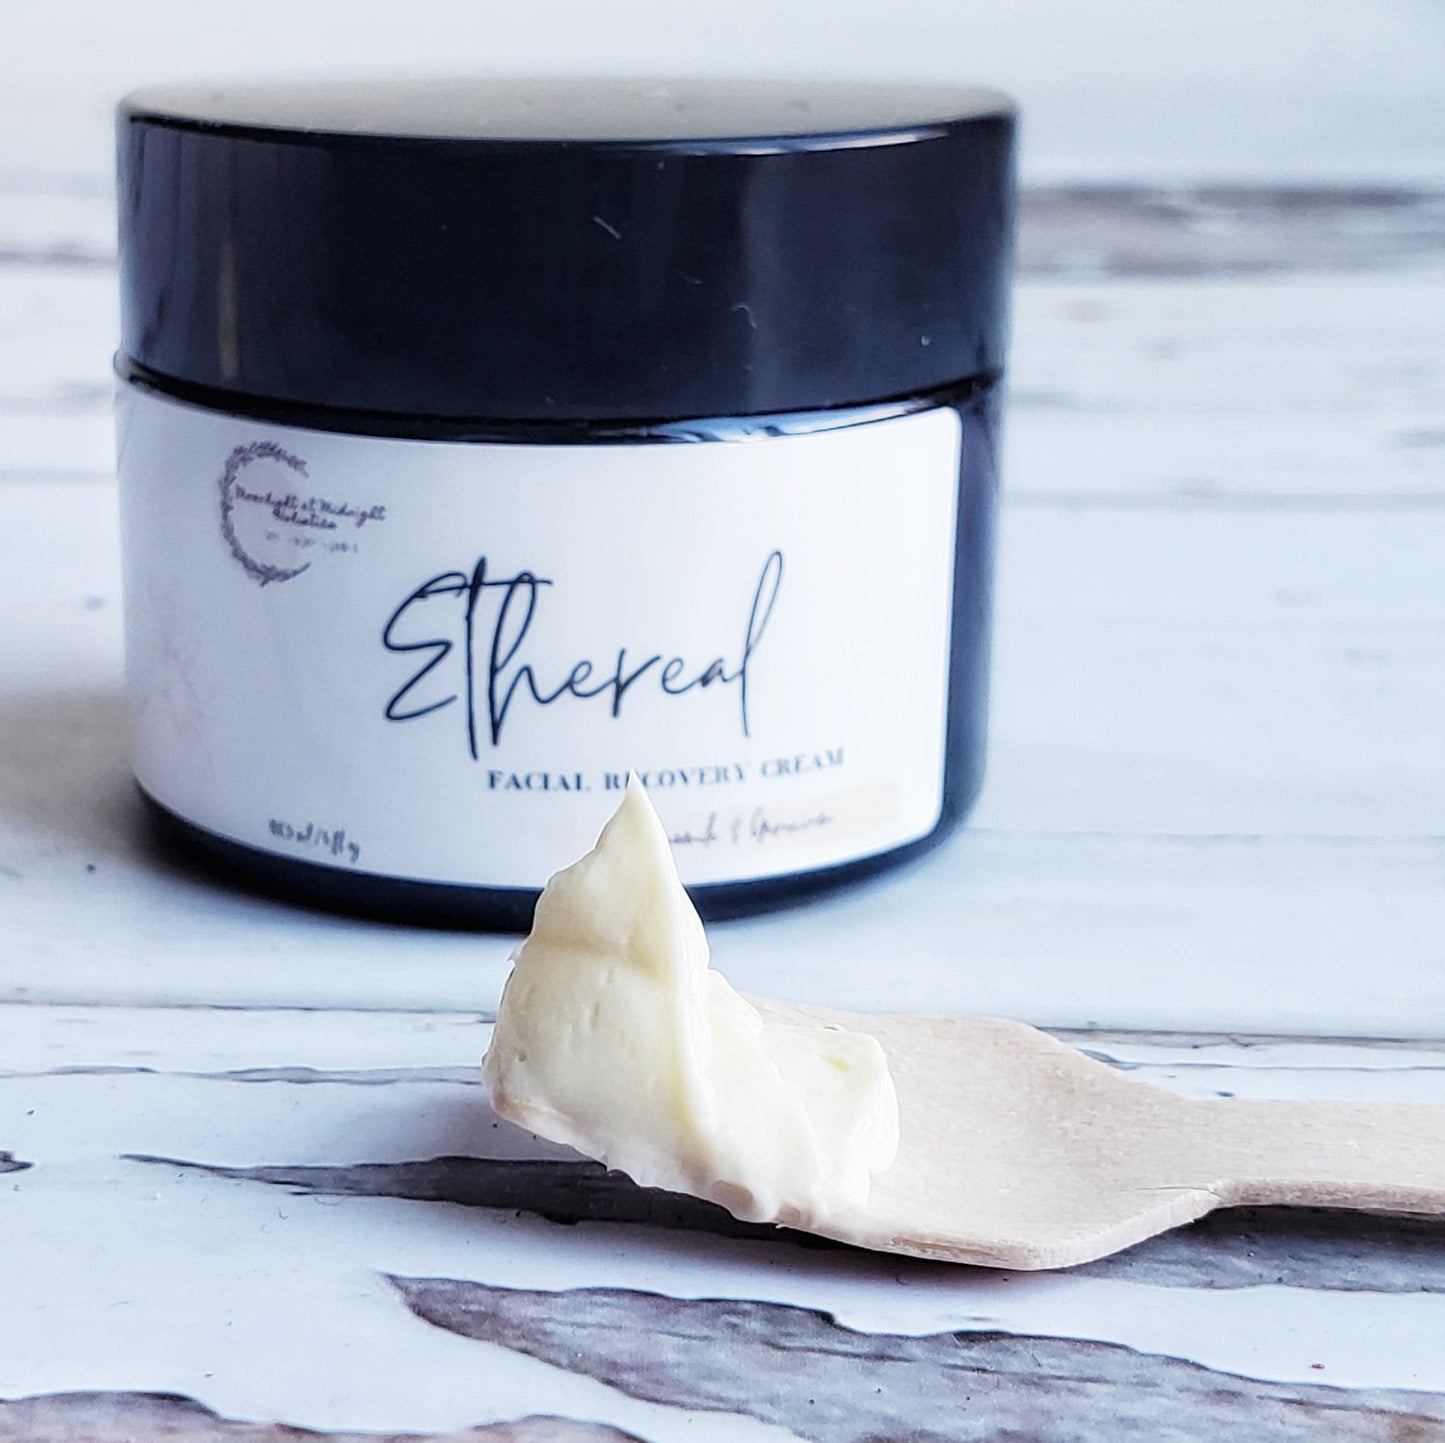 ETHEREAL Facial Recovery Cream | Made with Organic: Hemp Seed Oil, Sunflower Oil, Aloe Vera | Chamomile & Geranium |  Nightly Facial Mask